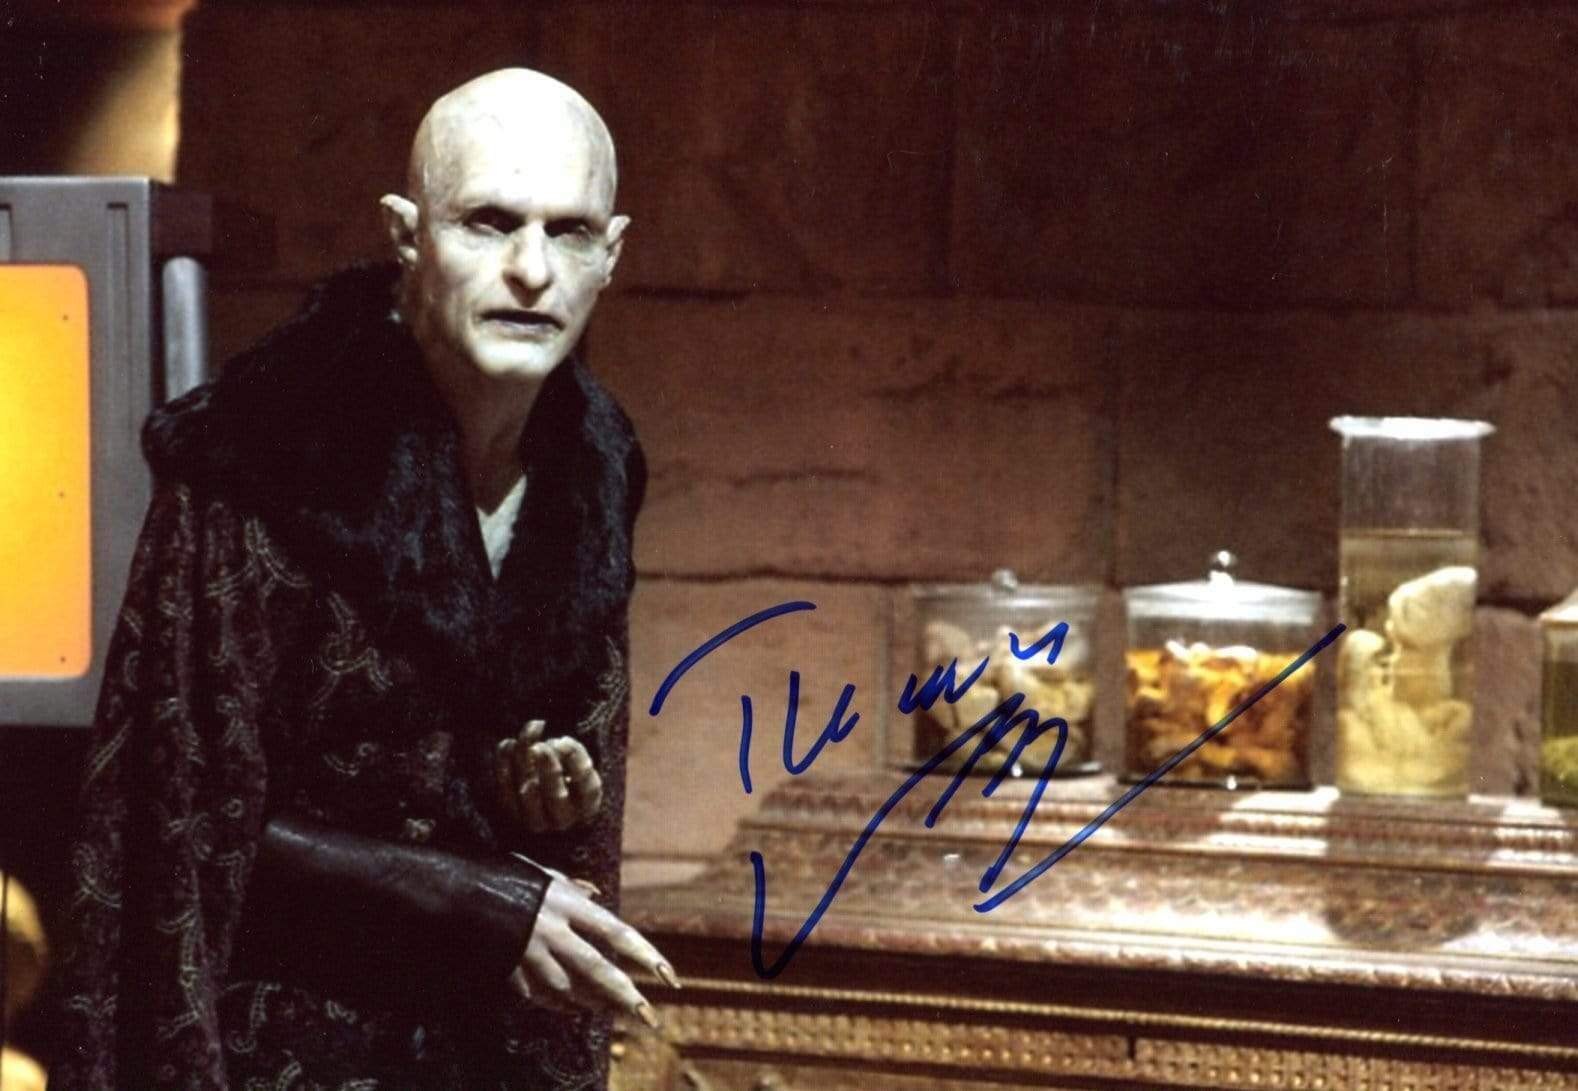 Thomas Kretschmann ACTOR autograph, In-Person signed Photo Poster painting